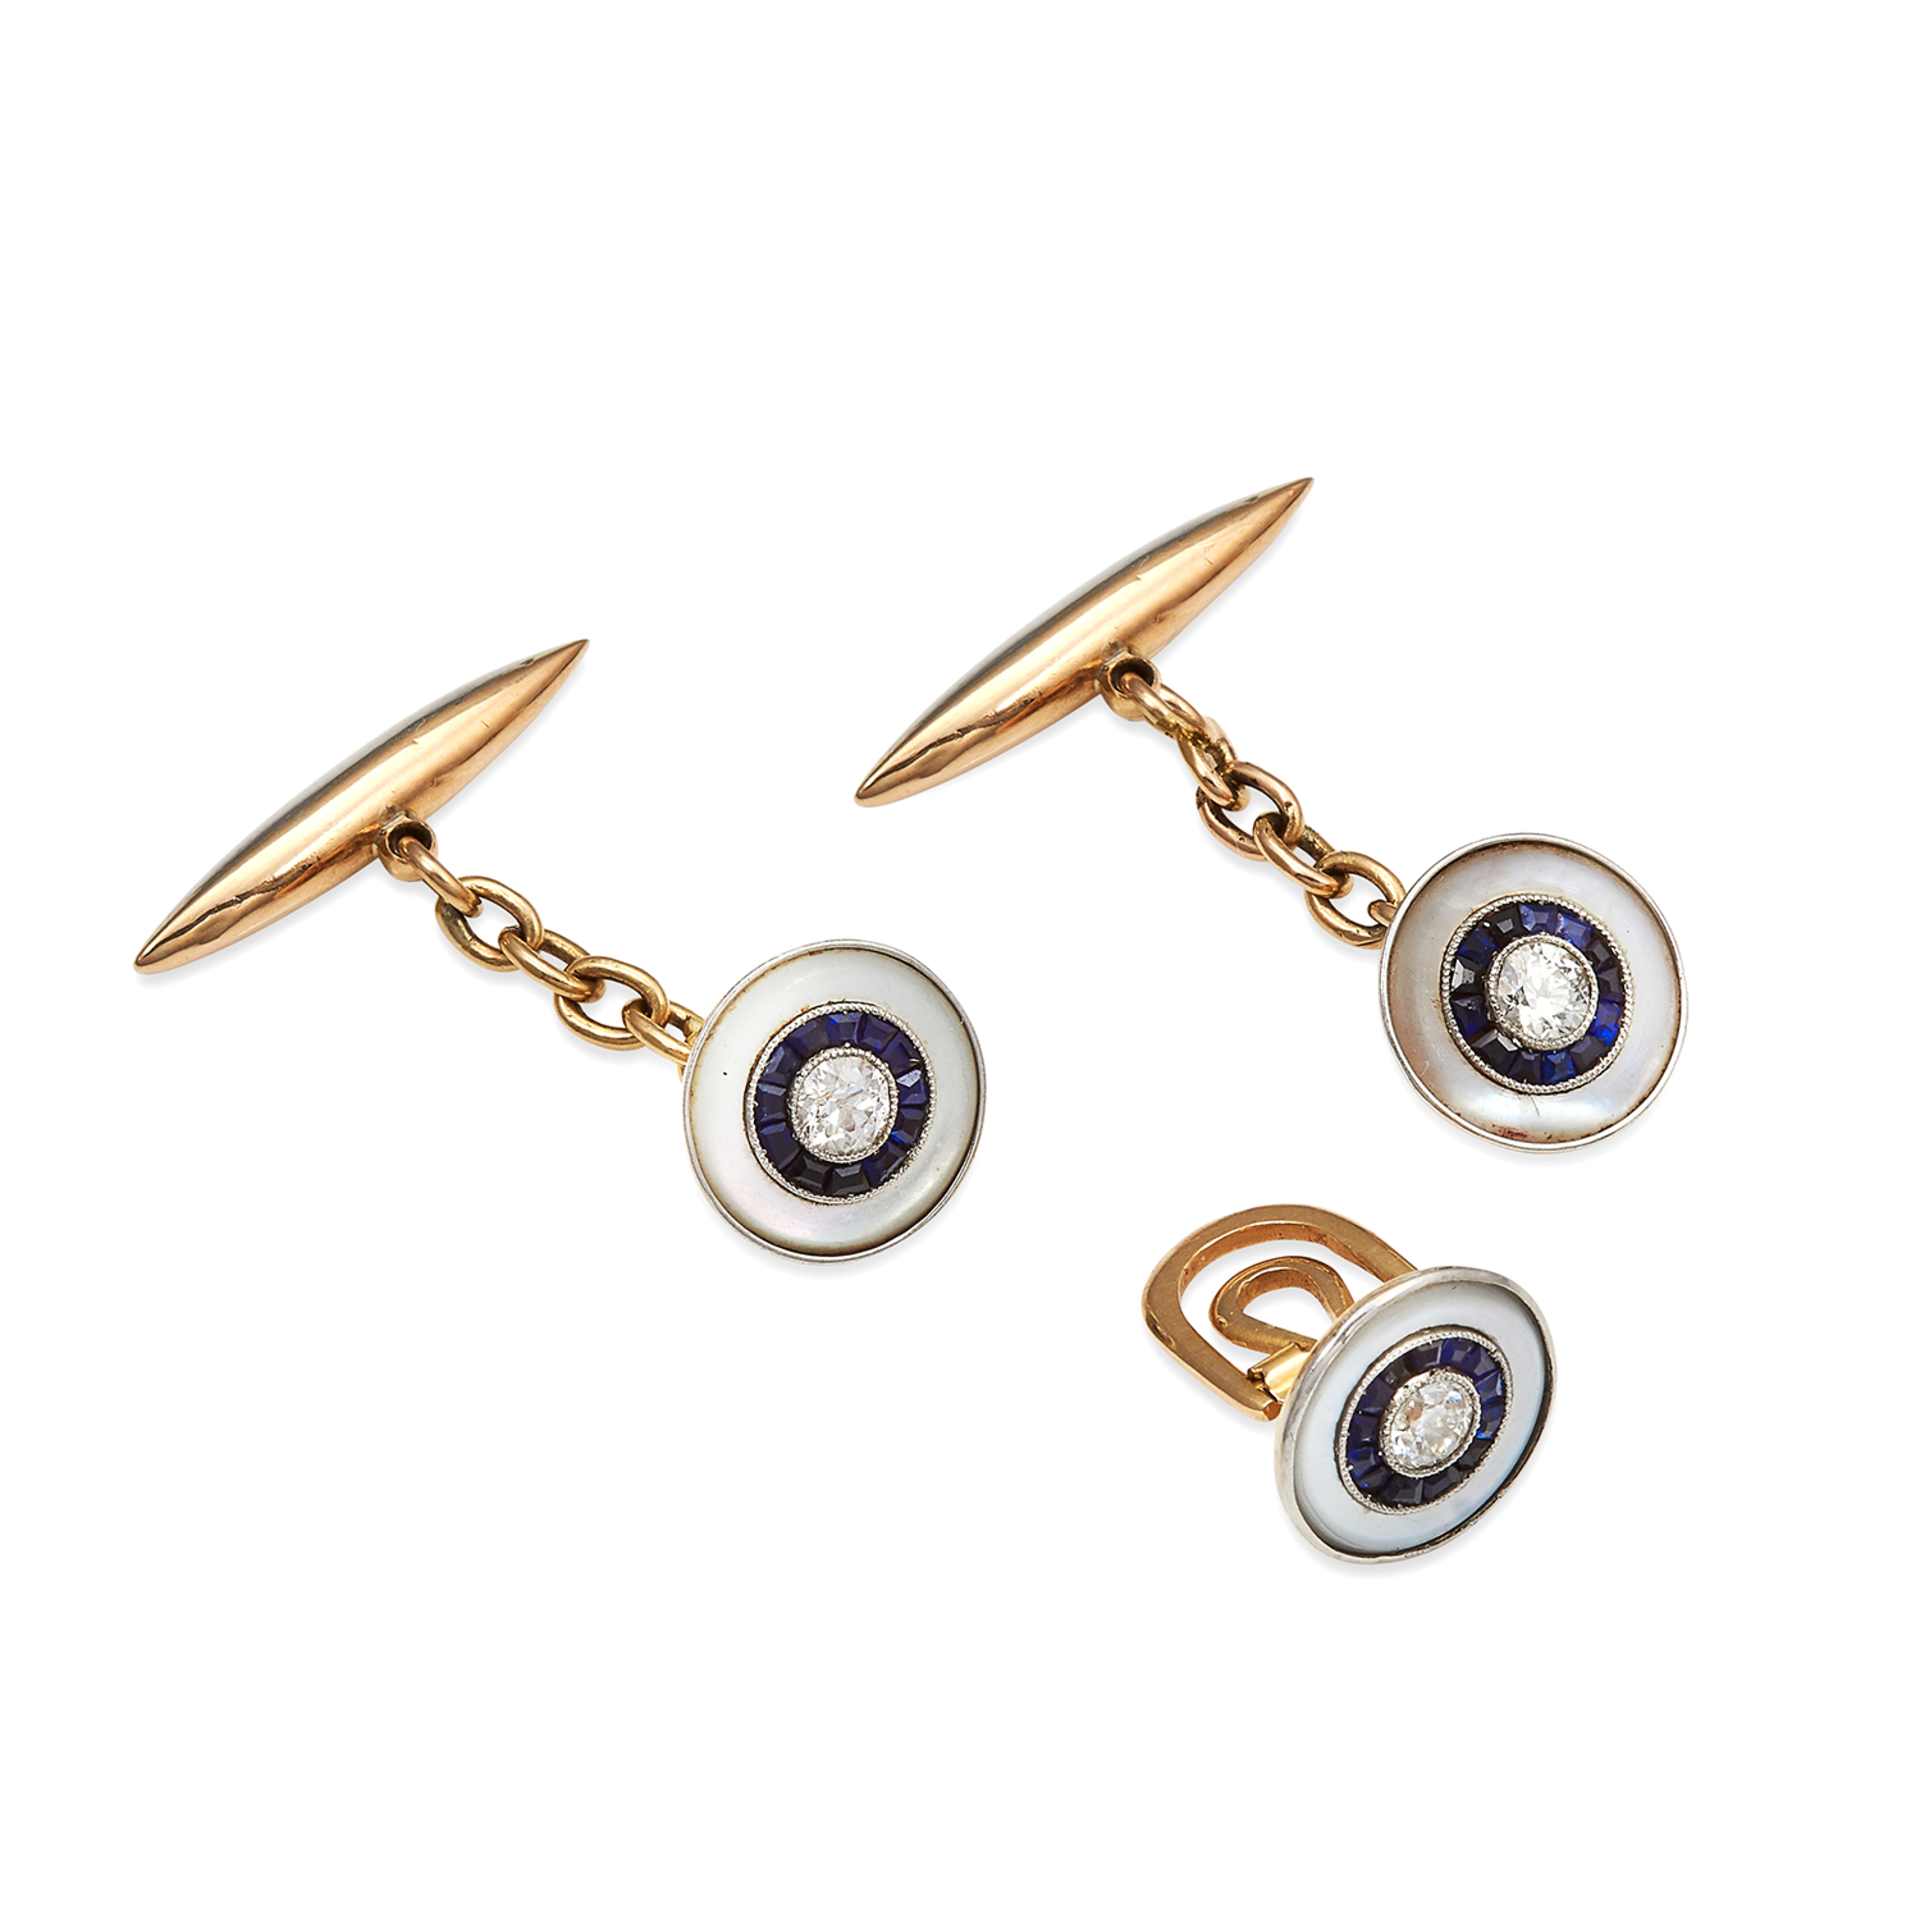 A PAIR OF ANTIQUE DIAMOND AND SAPPHIRE CUFFLINKS AND BUTTON in yellow gold and white gold or